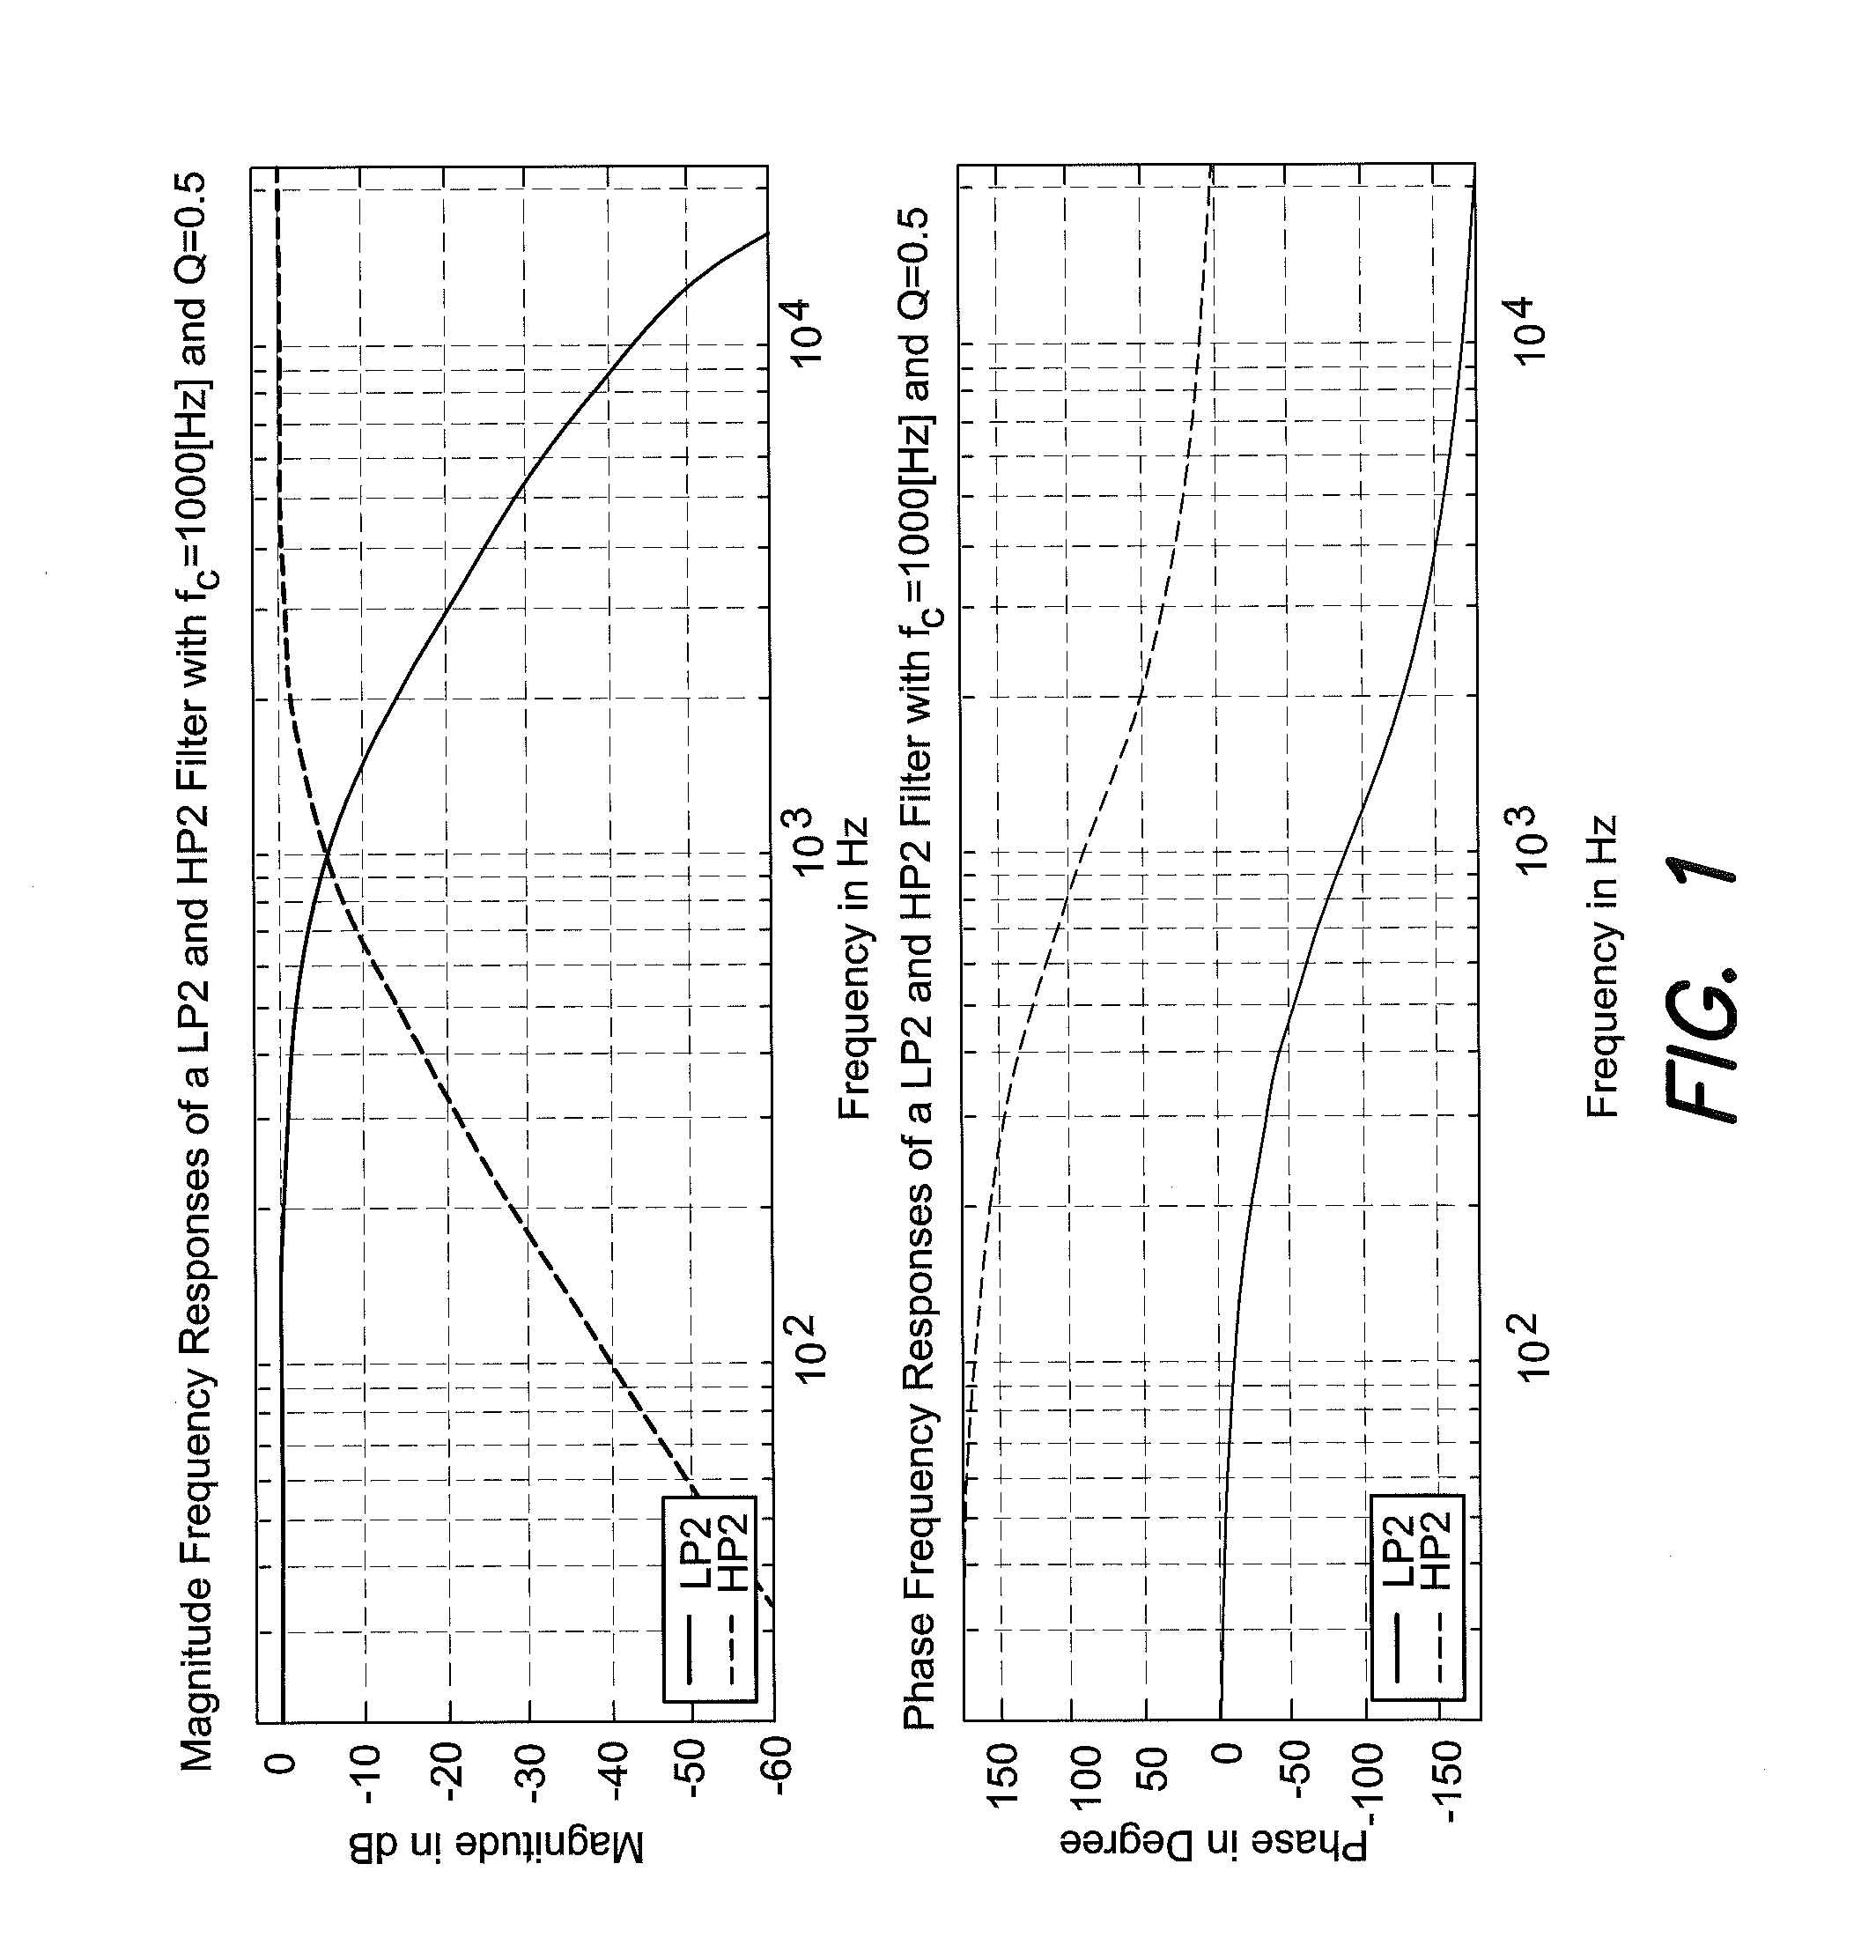 Digital equalizing filters with fixed phase response